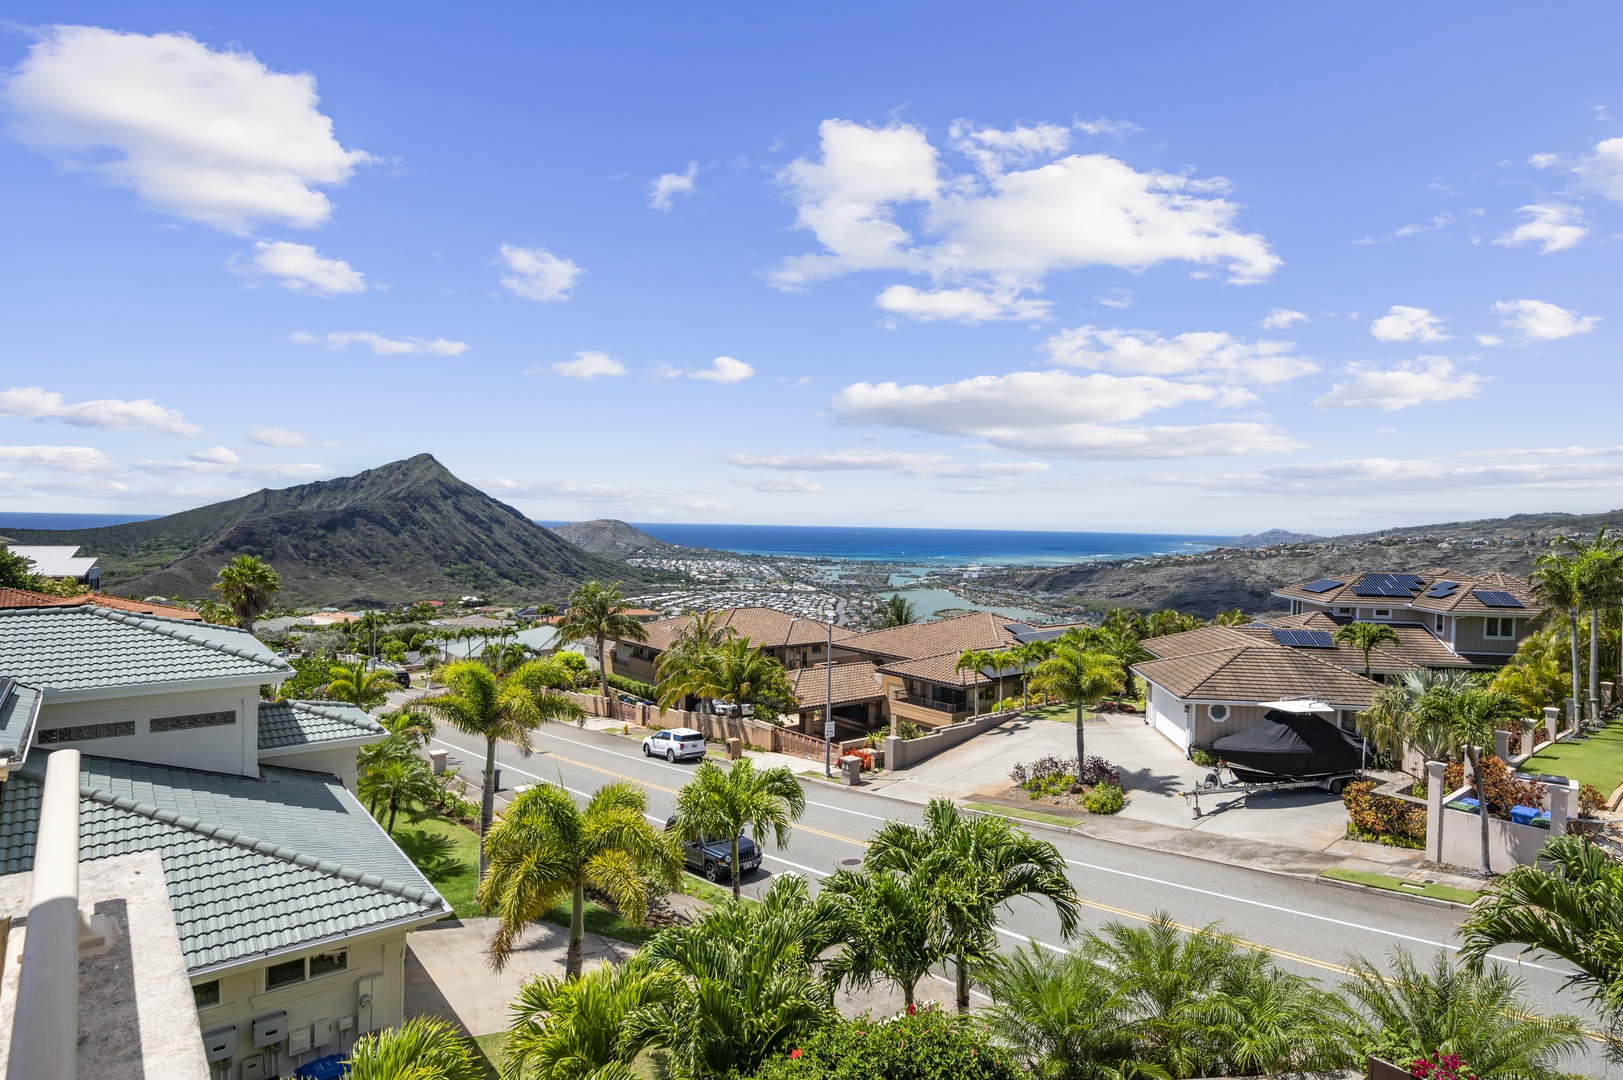 Honolulu Vacation Rentals, Lotus on a Hill* - The views at Lotus on a Hill are truly unbeatable